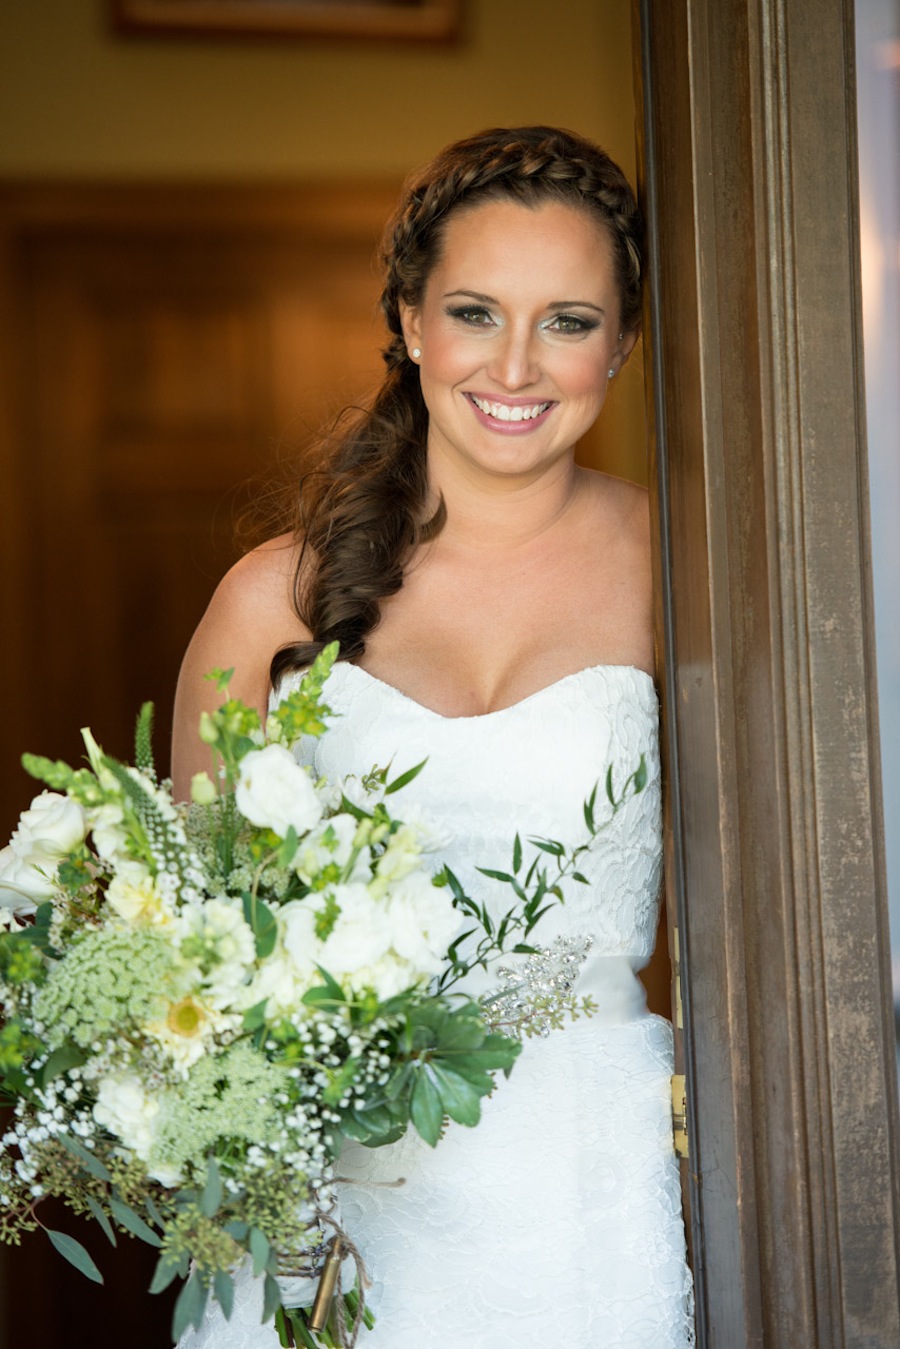 Rustic, Country Bride with White & Green Wedding Bouquet